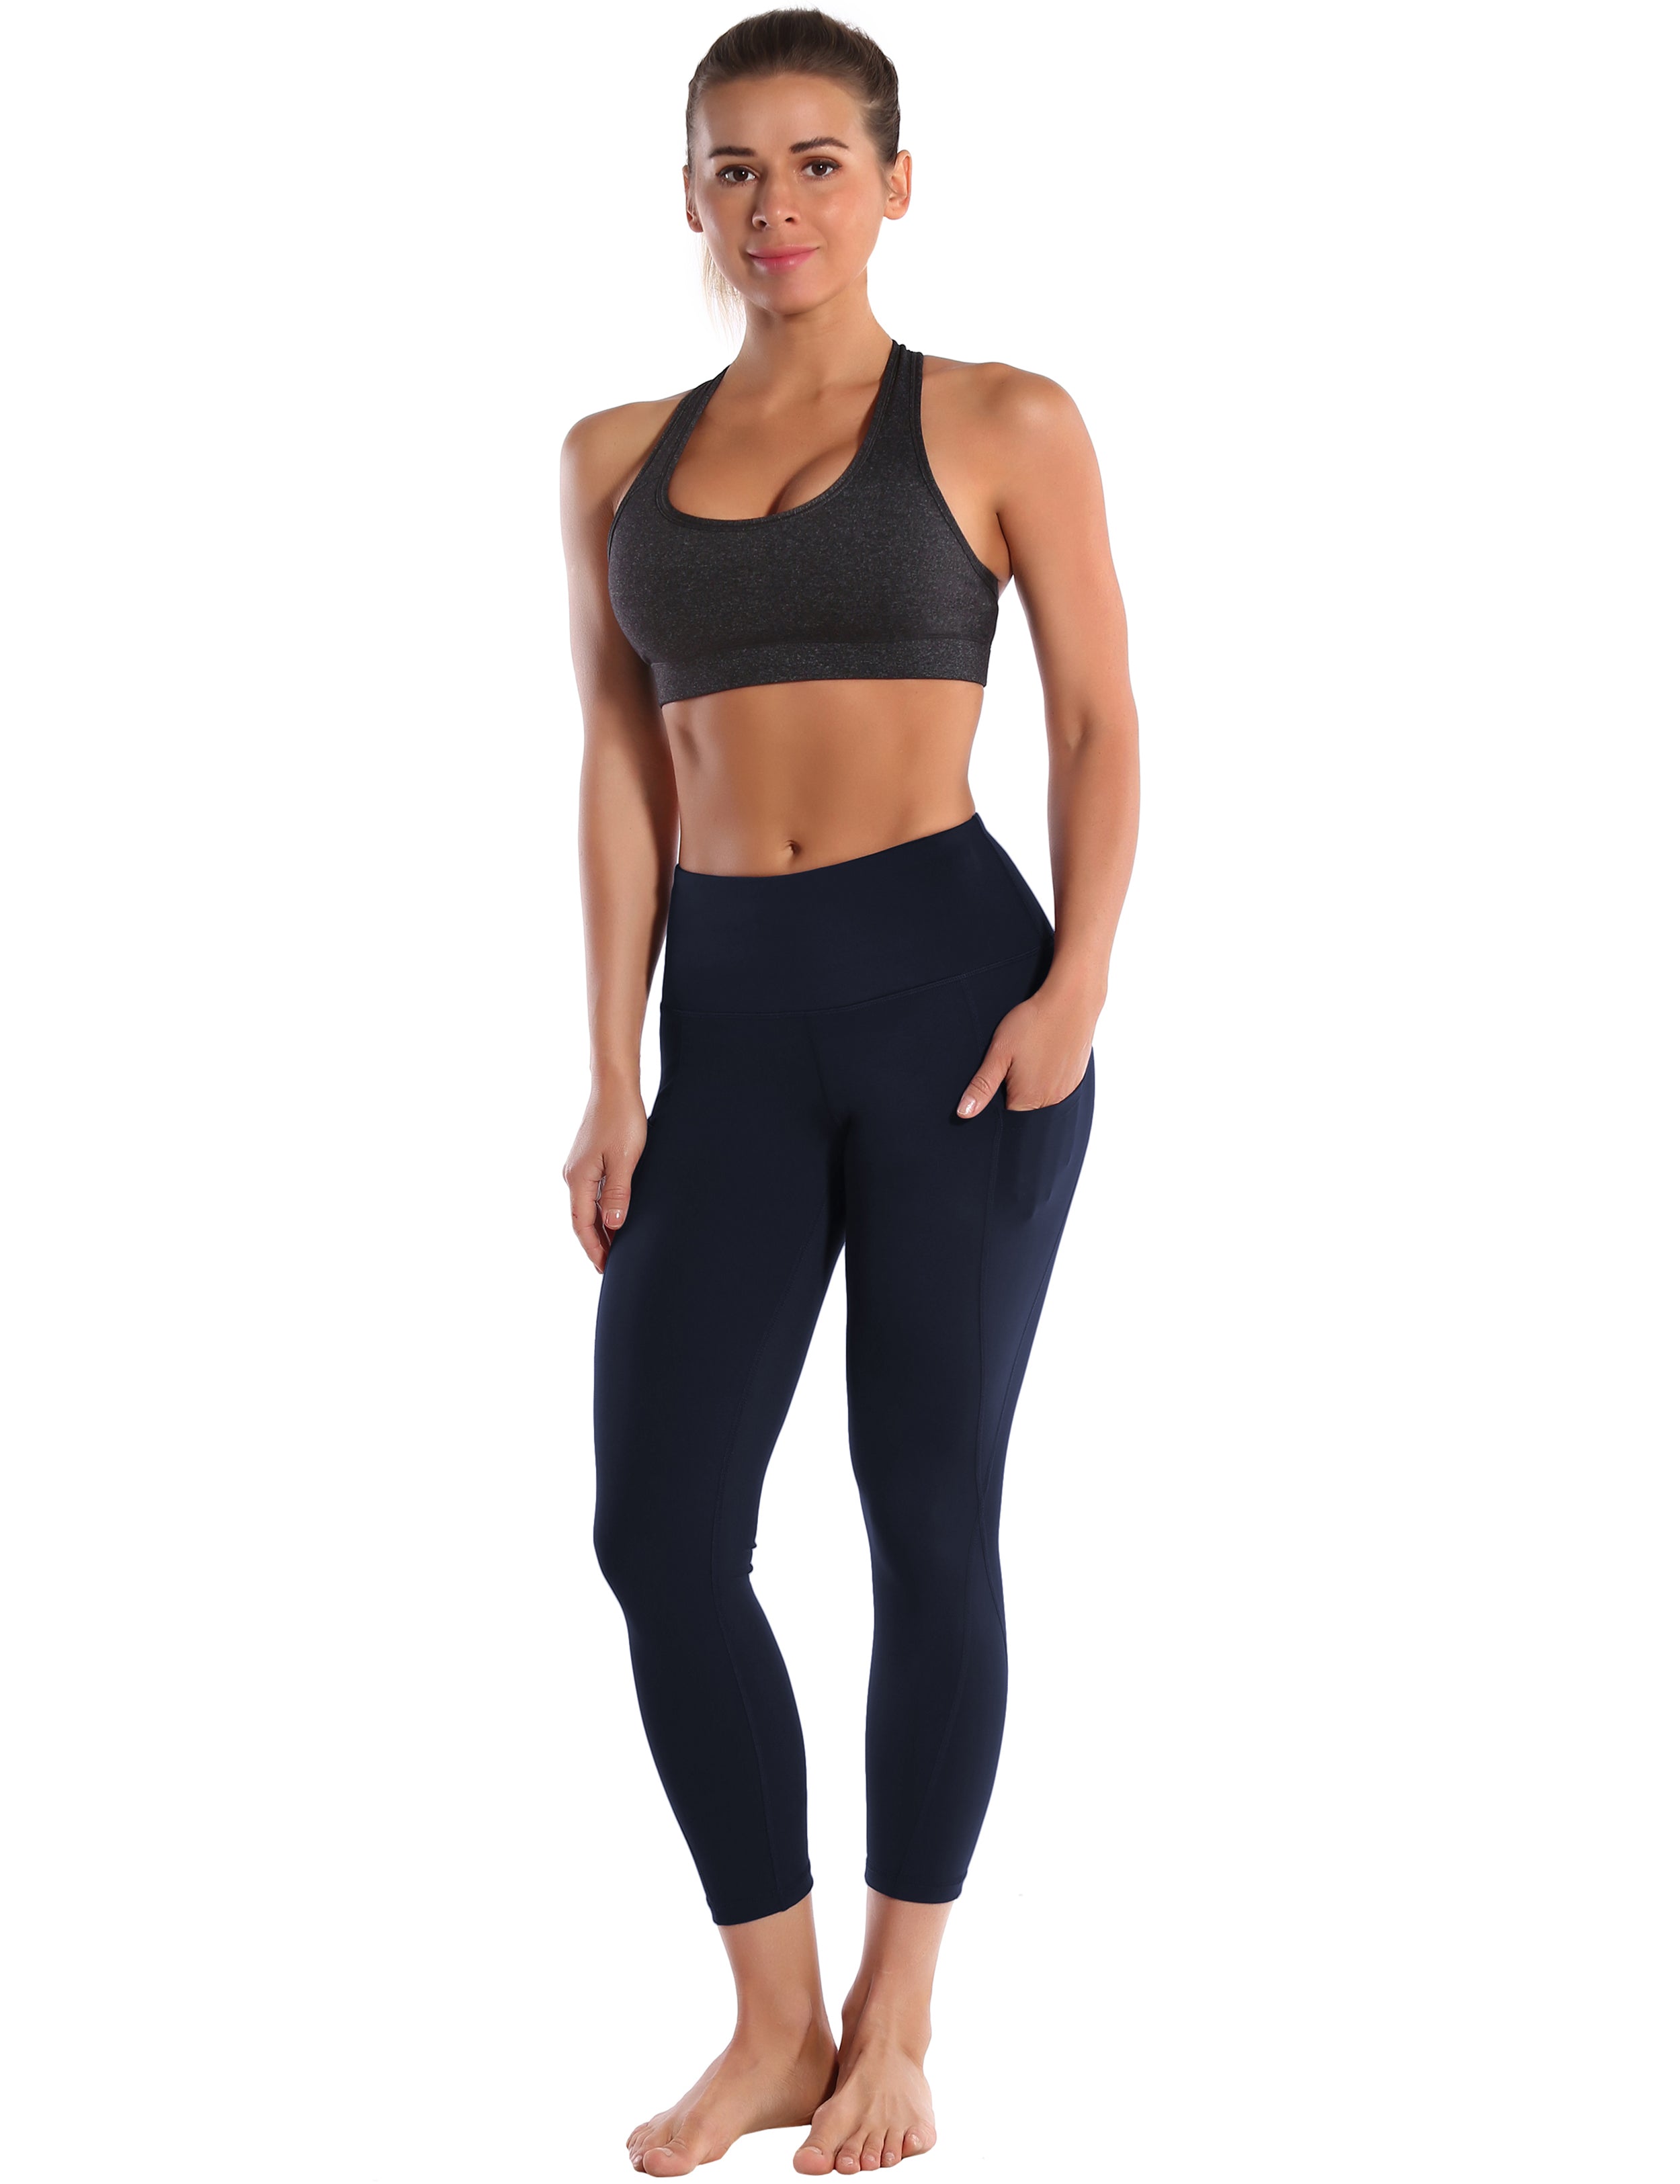 22" High Waist Side Pockets Capris darknavy 75%Nylon/25%Spandex Fabric doesn't attract lint easily 4-way stretch No see-through Moisture-wicking Tummy control Inner pocket